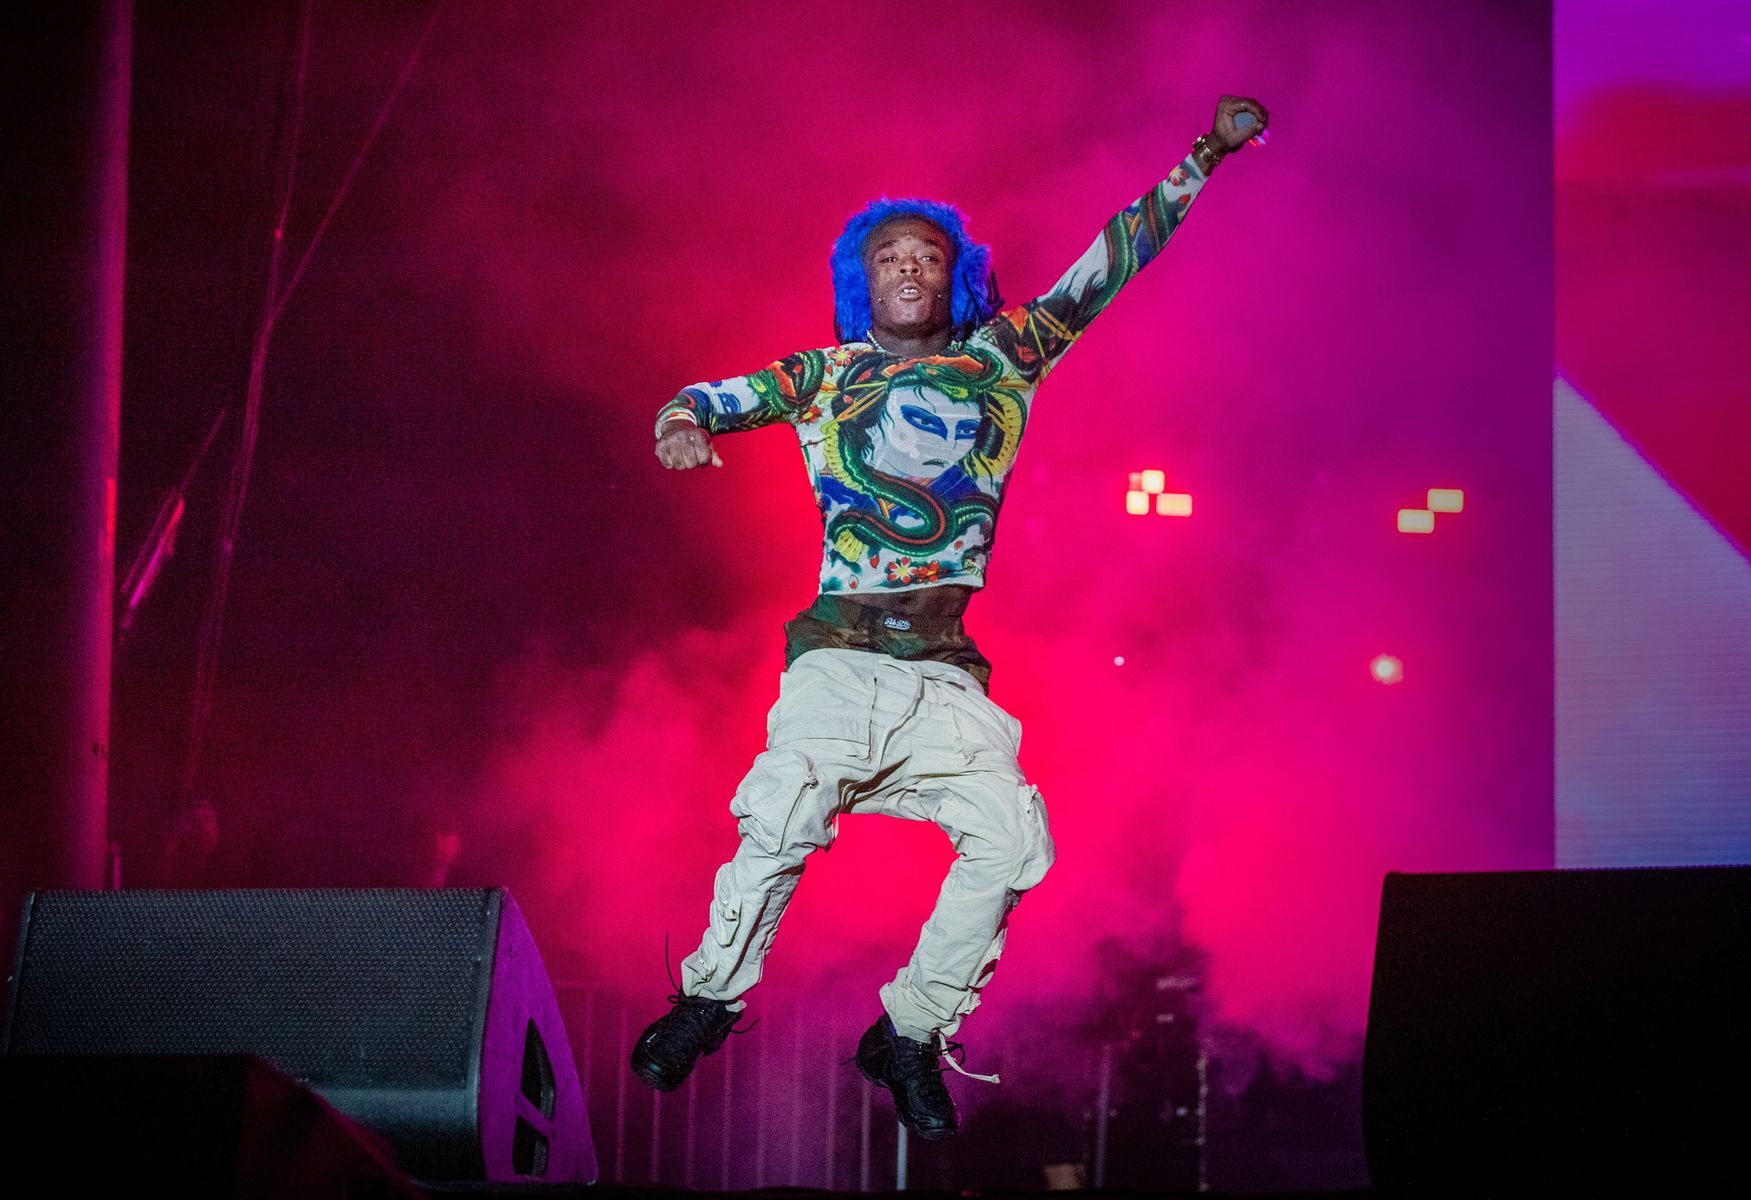 <p><a href="https://www.hotnewhiphop.com/5-early-gems-from-lil-uzi-verts-soundcloud-news.25121.html">Early songs</a> like “Motorola” and “All Night,” which Lil Uzi Vert shared on SoundCloud back in 2014 and 2015, helped pave the way for the Philly rapper to become a frequent name on the Billboard Hot 100. His <a href="https://www.allmusic.com/artist/lil-uzi-vert-mn0003463745/biography">collaboration with Migos</a> on the 2017 hit song “Bad and Boujee” brought even further success. In 2021, he announced his forthcoming album <a href="https://www.hotnewhiphop.com/lil-uzi-verts-the-pink-tape-everything-we-know-news.149254.html"><em>The Pink Tape</em></a> and fans are eagerly awaiting its release.</p>